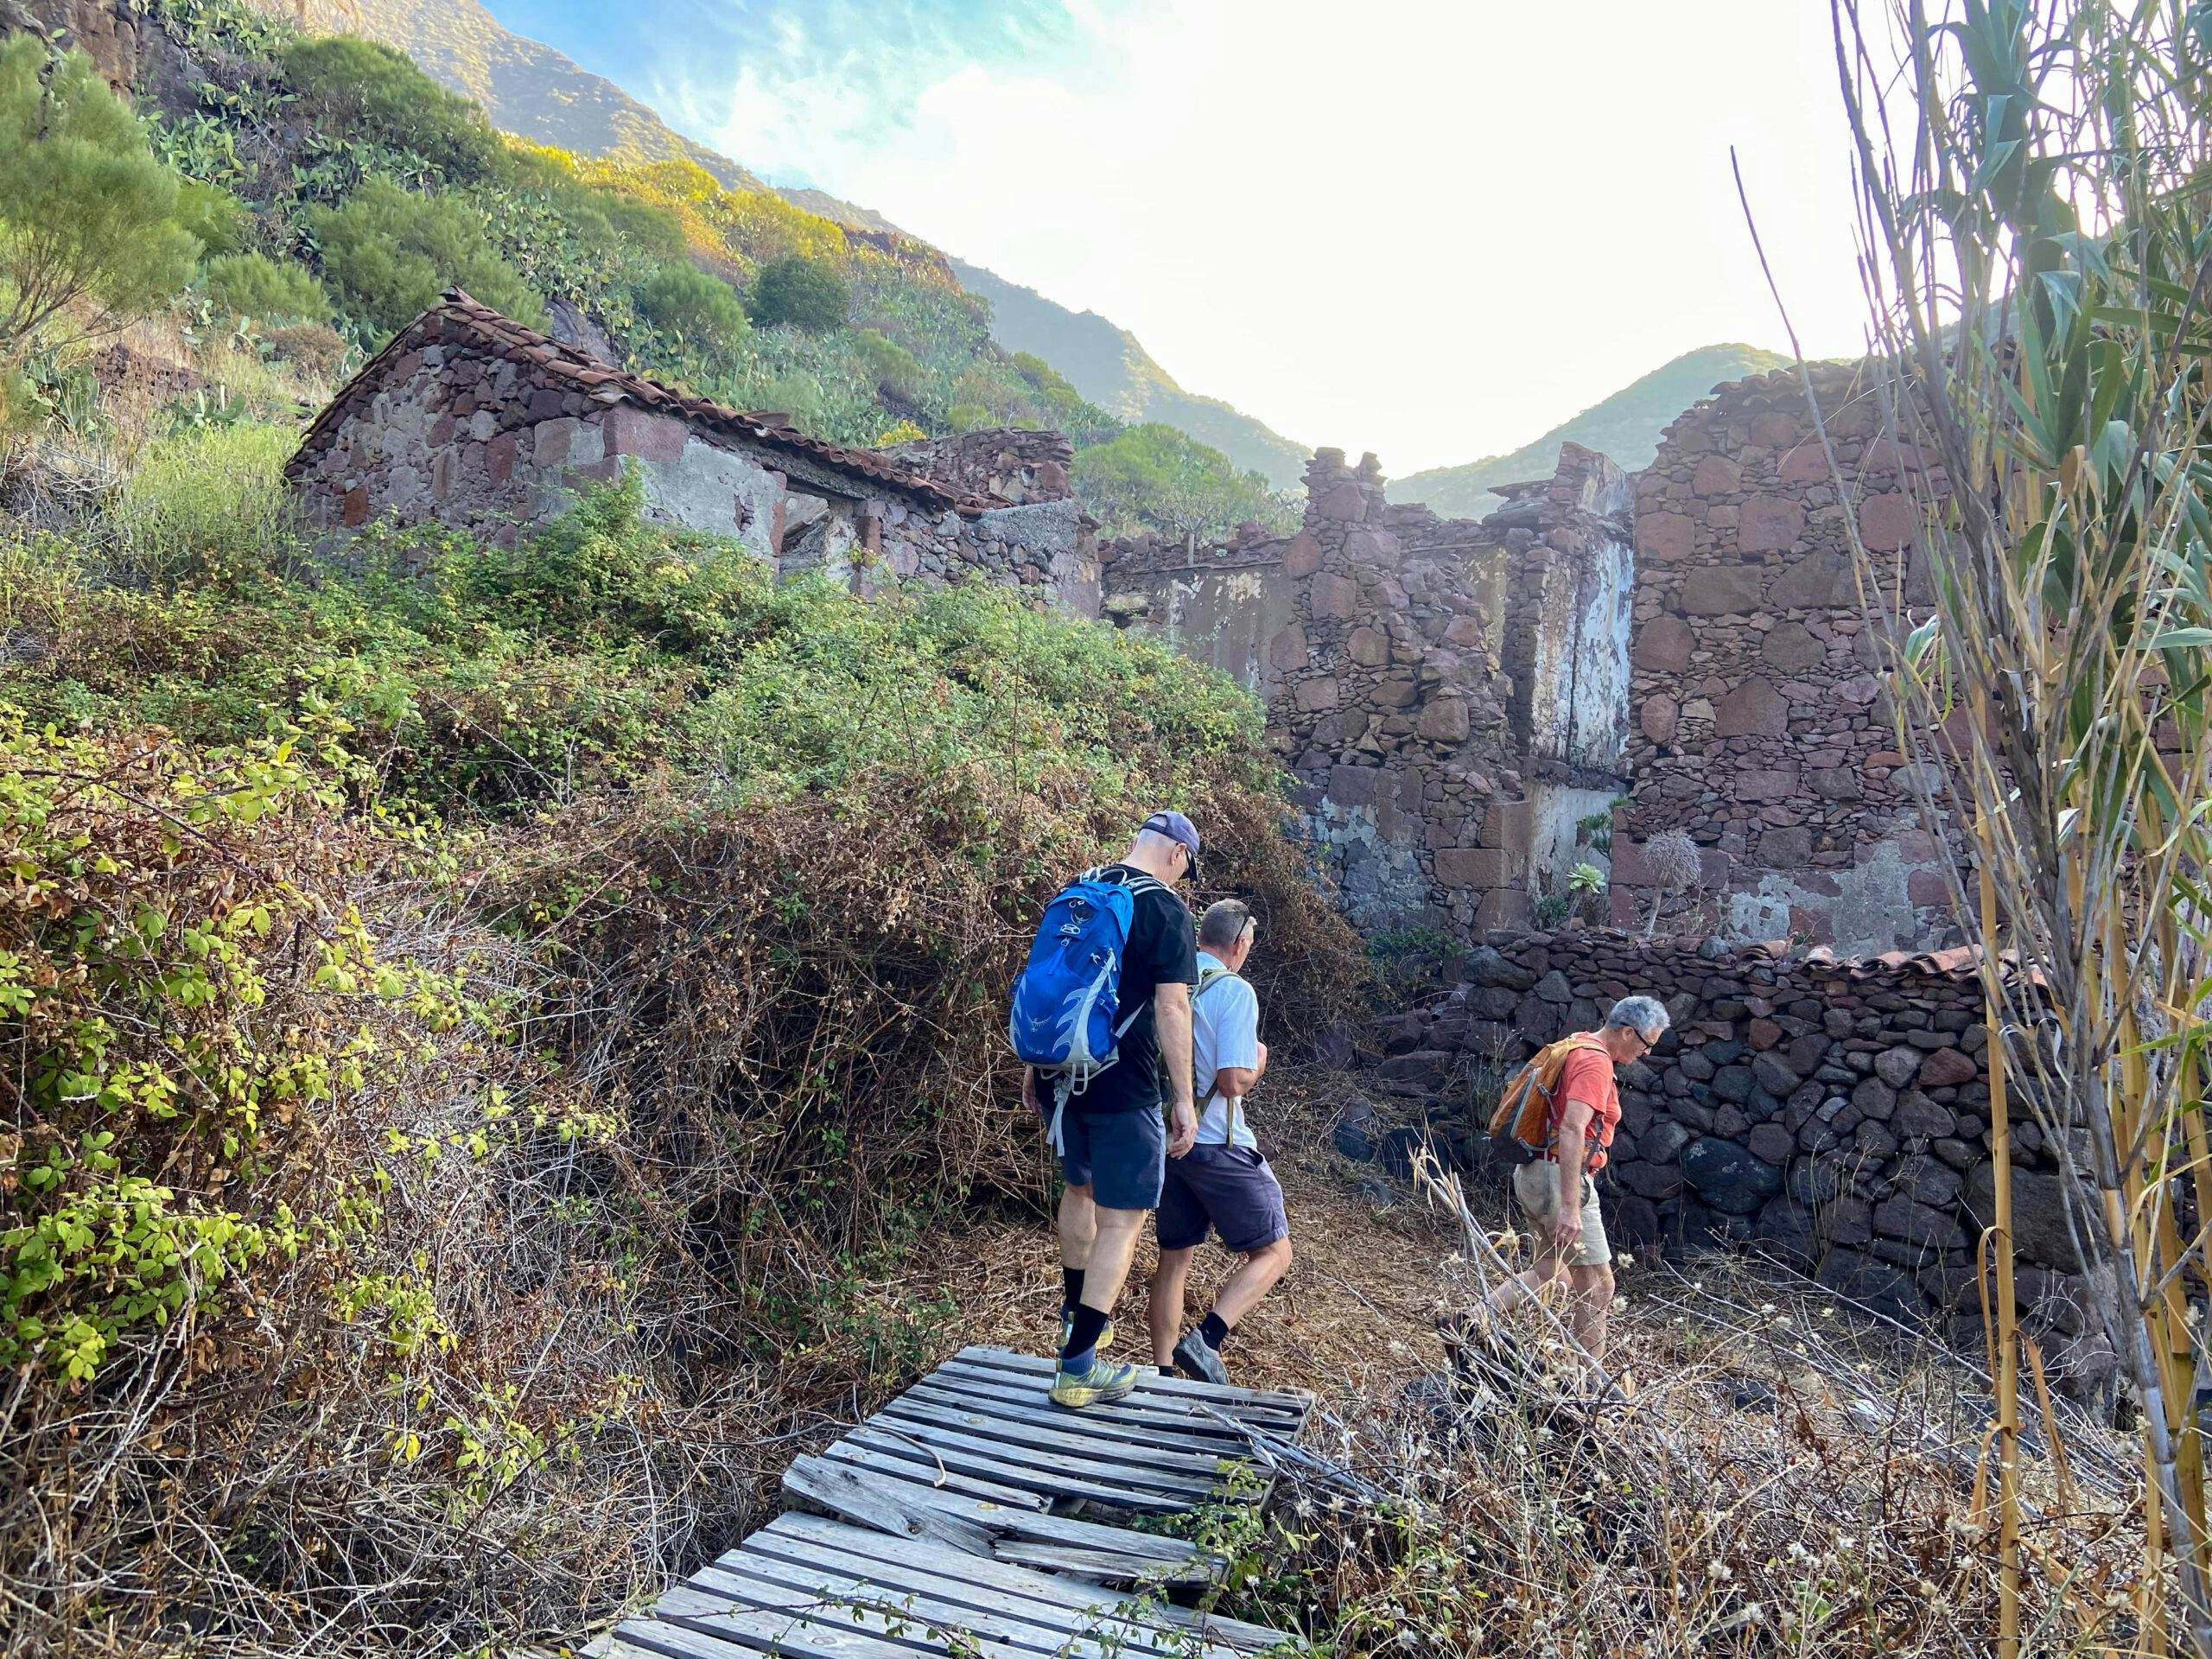 Hikers on the entry path at the Barranco Juan López ruin